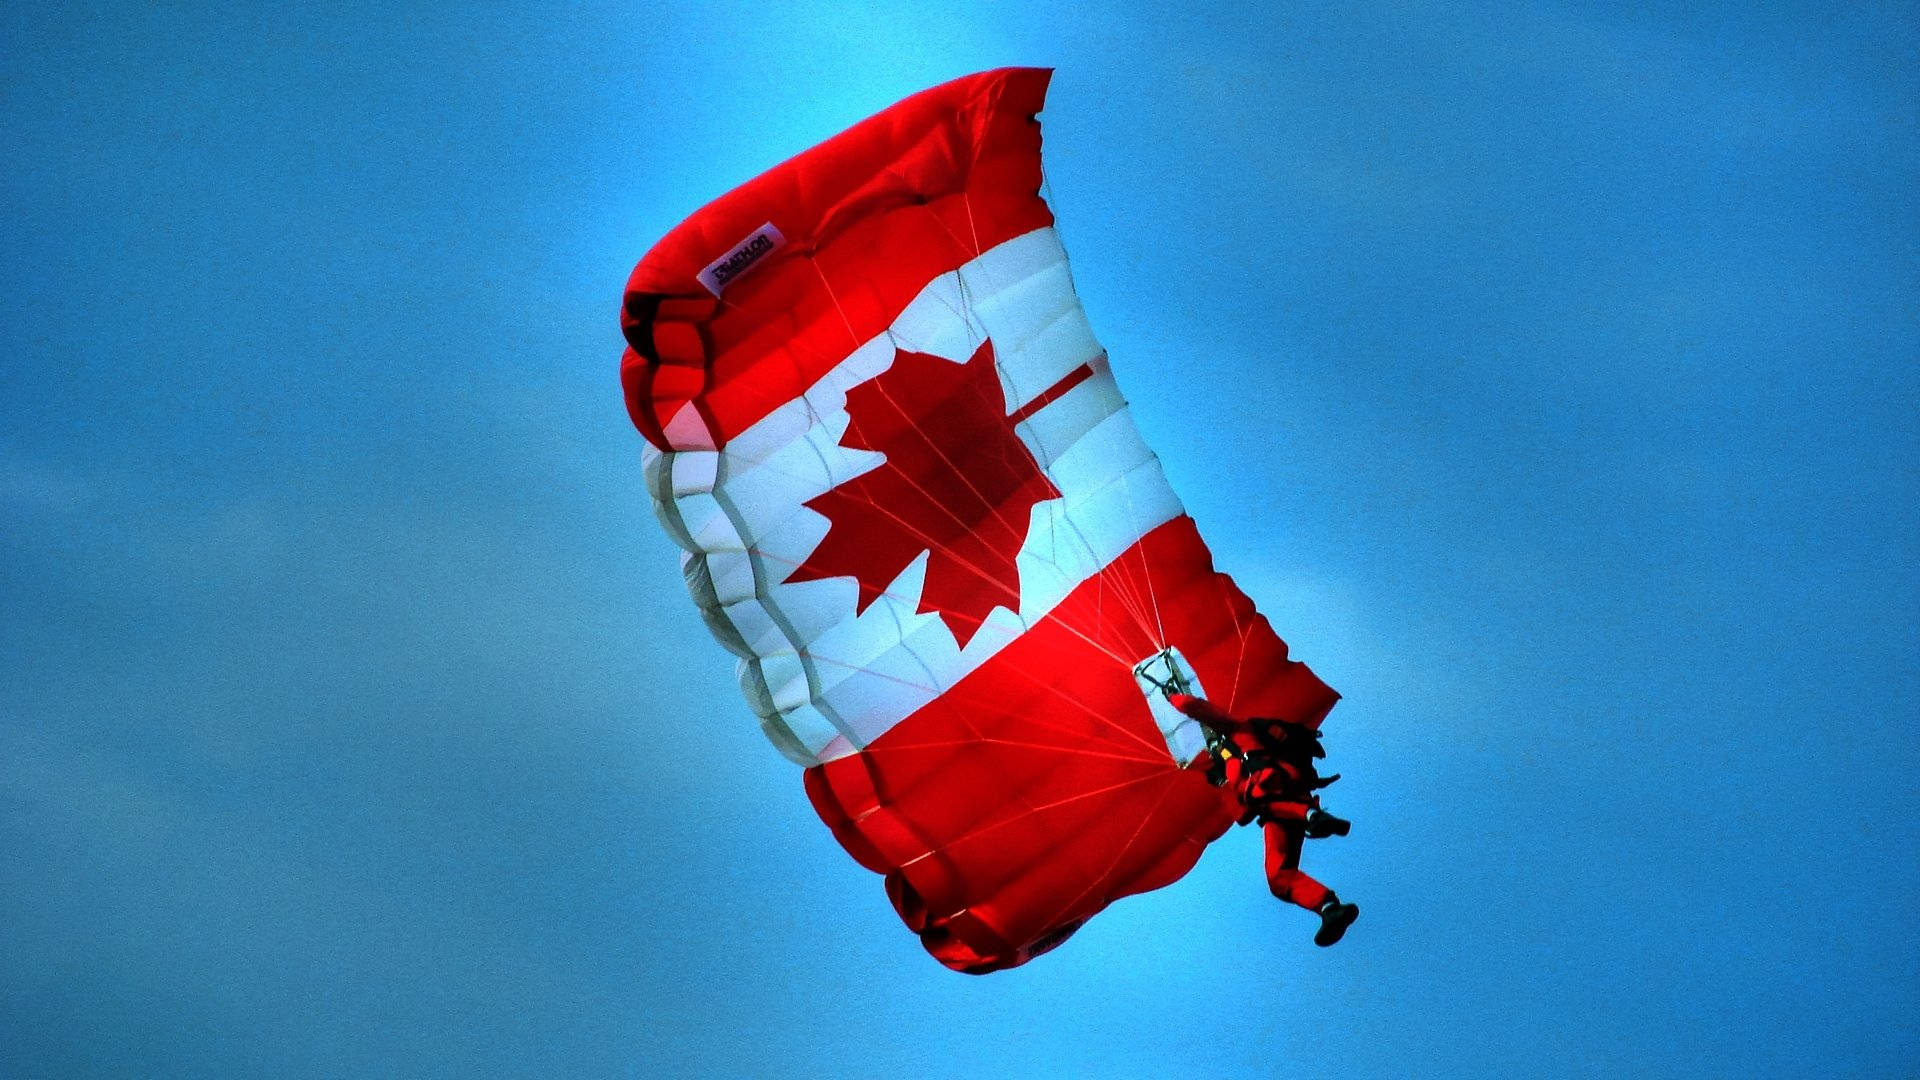 Majestic Shot of Canada Flag Floating on a Parachute Against the Blue Sky Wallpaper